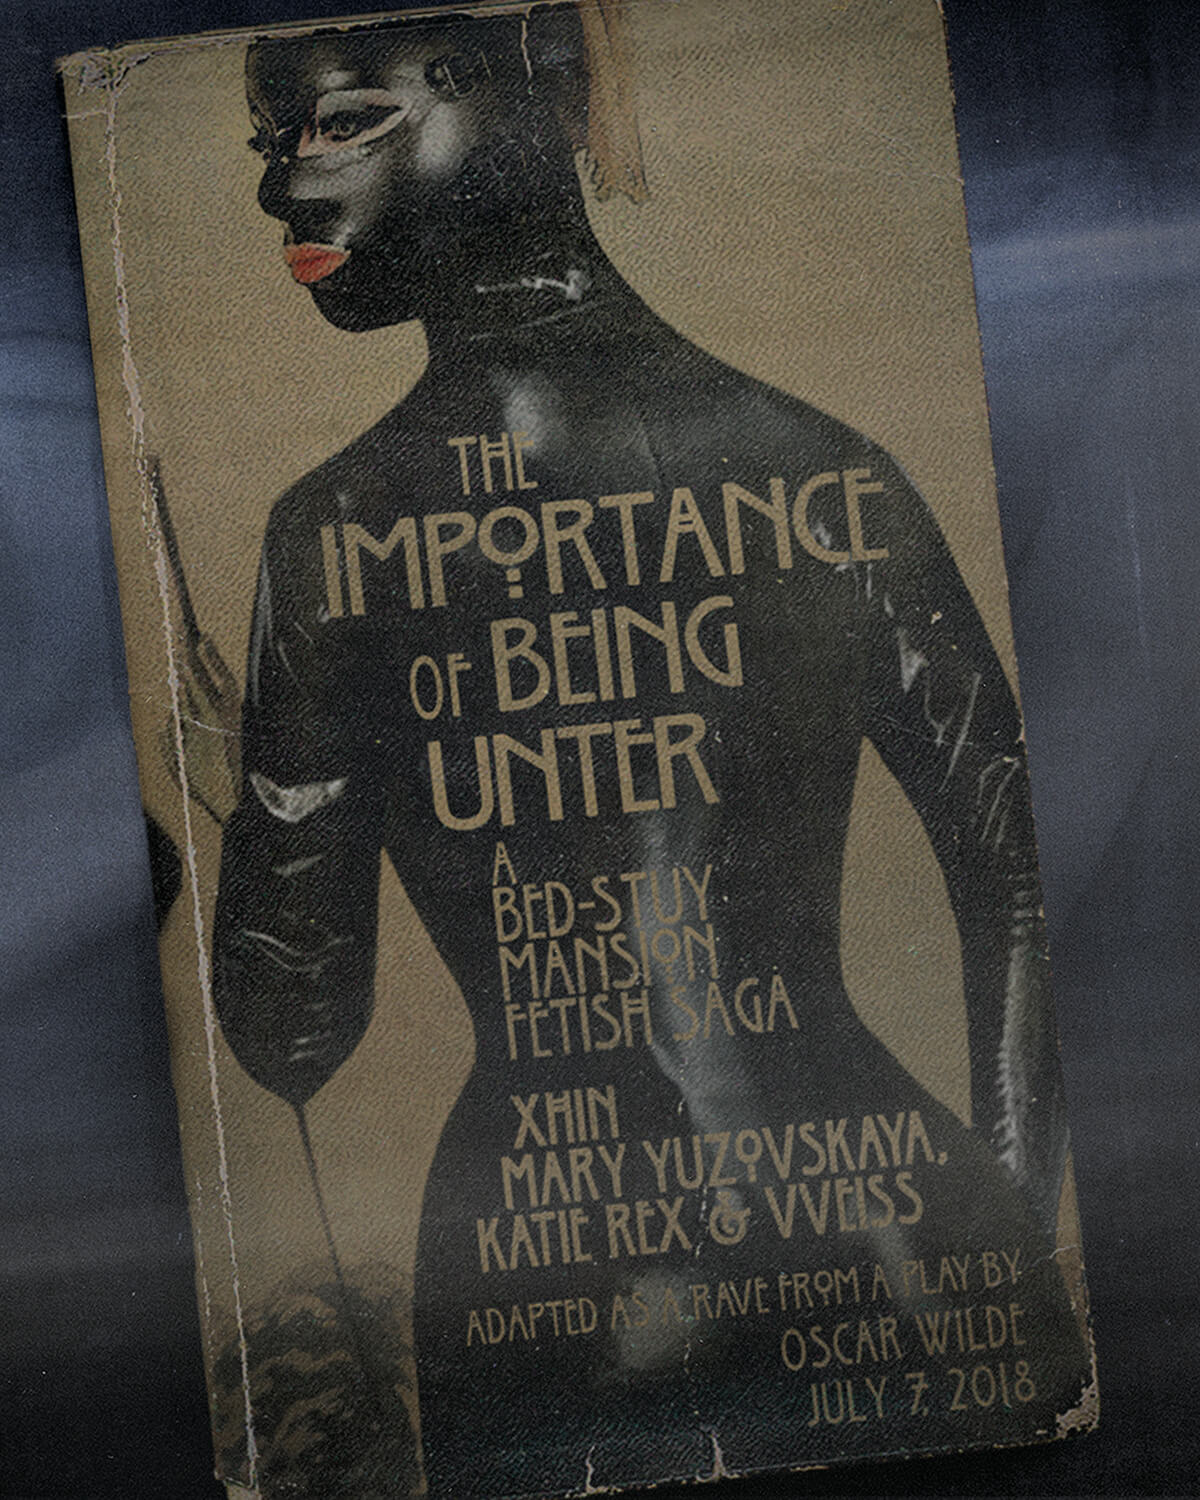 Poster for The Importance of Being Unter, a Bed-Stuy Mansion Fetish Saga